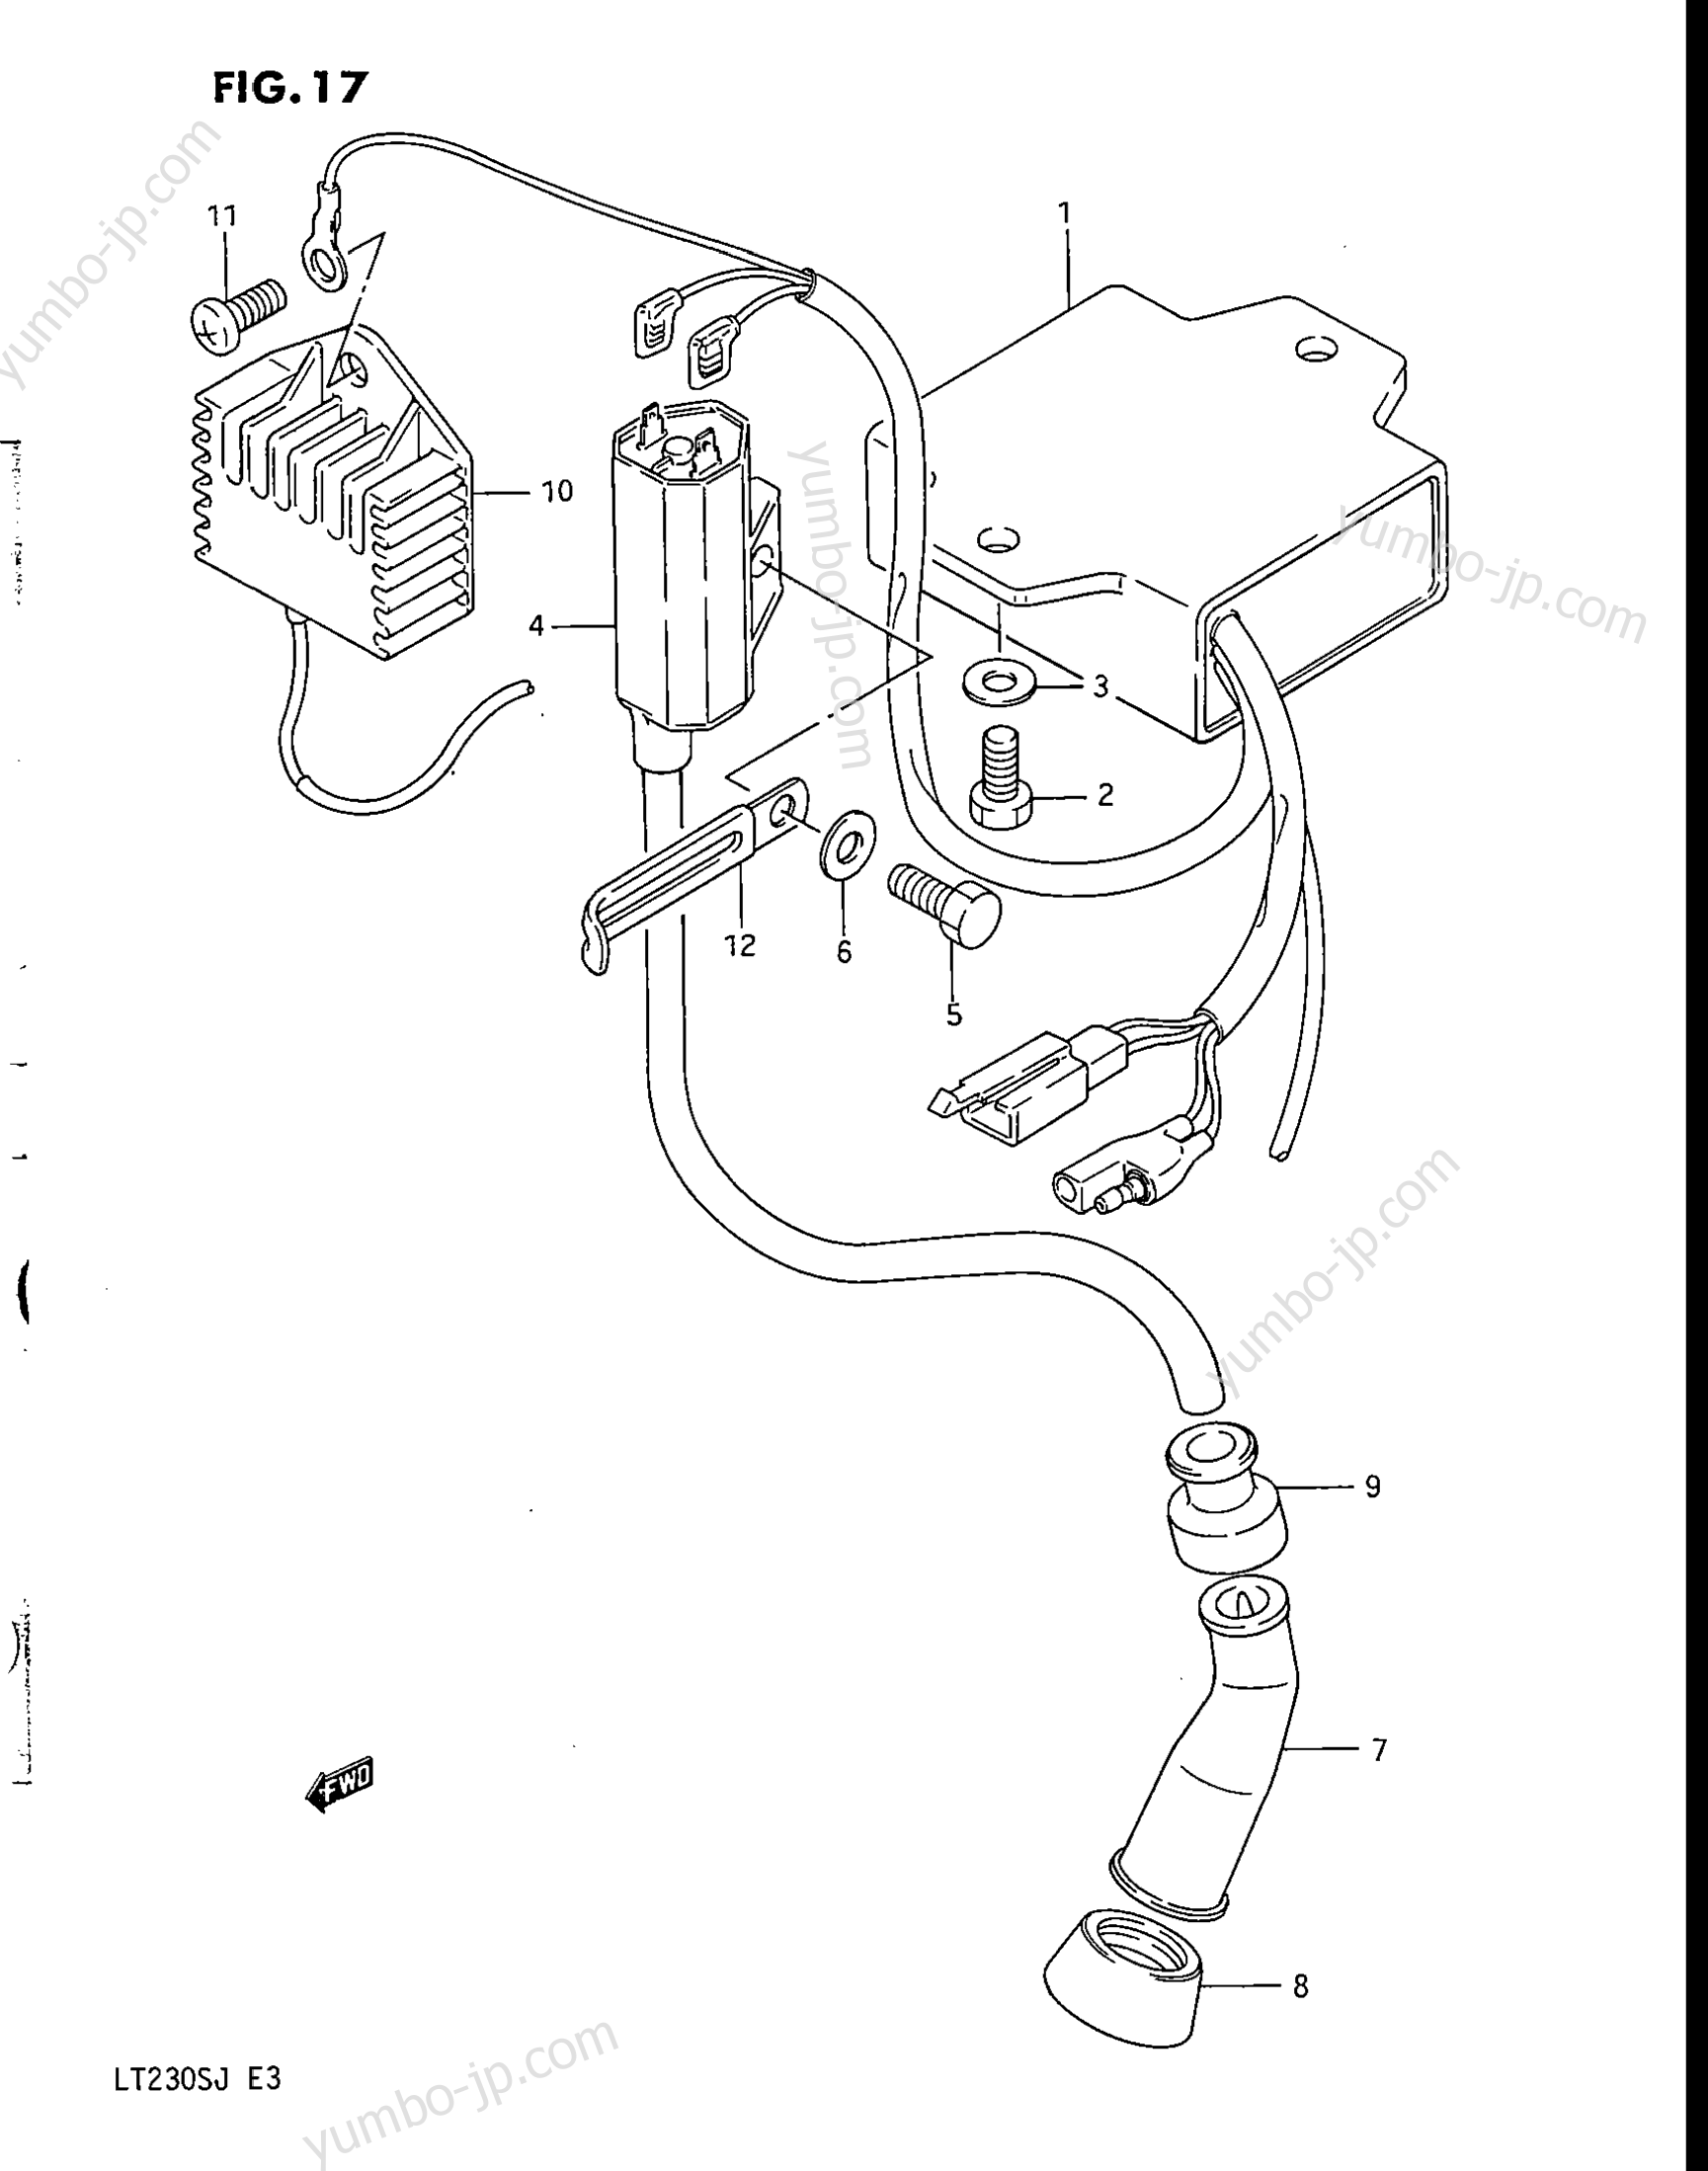 Electrical for ATVs SUZUKI LT230S 1987 year